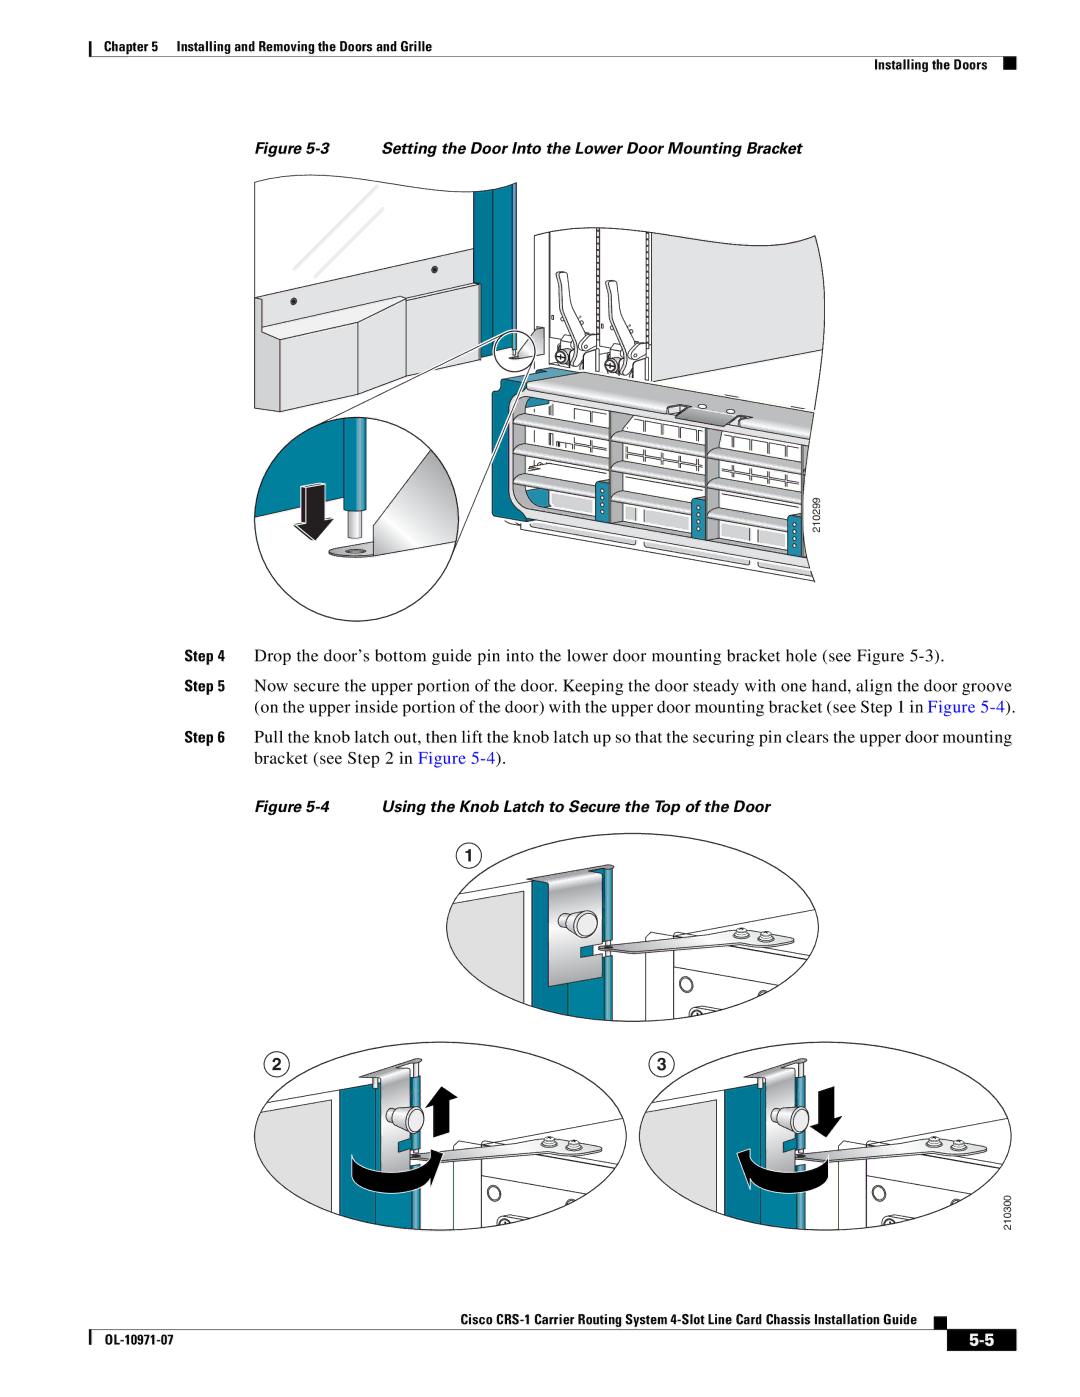 Cisco Systems Cisco CRS-1 manual Setting the Door Into the Lower Door Mounting Bracket 